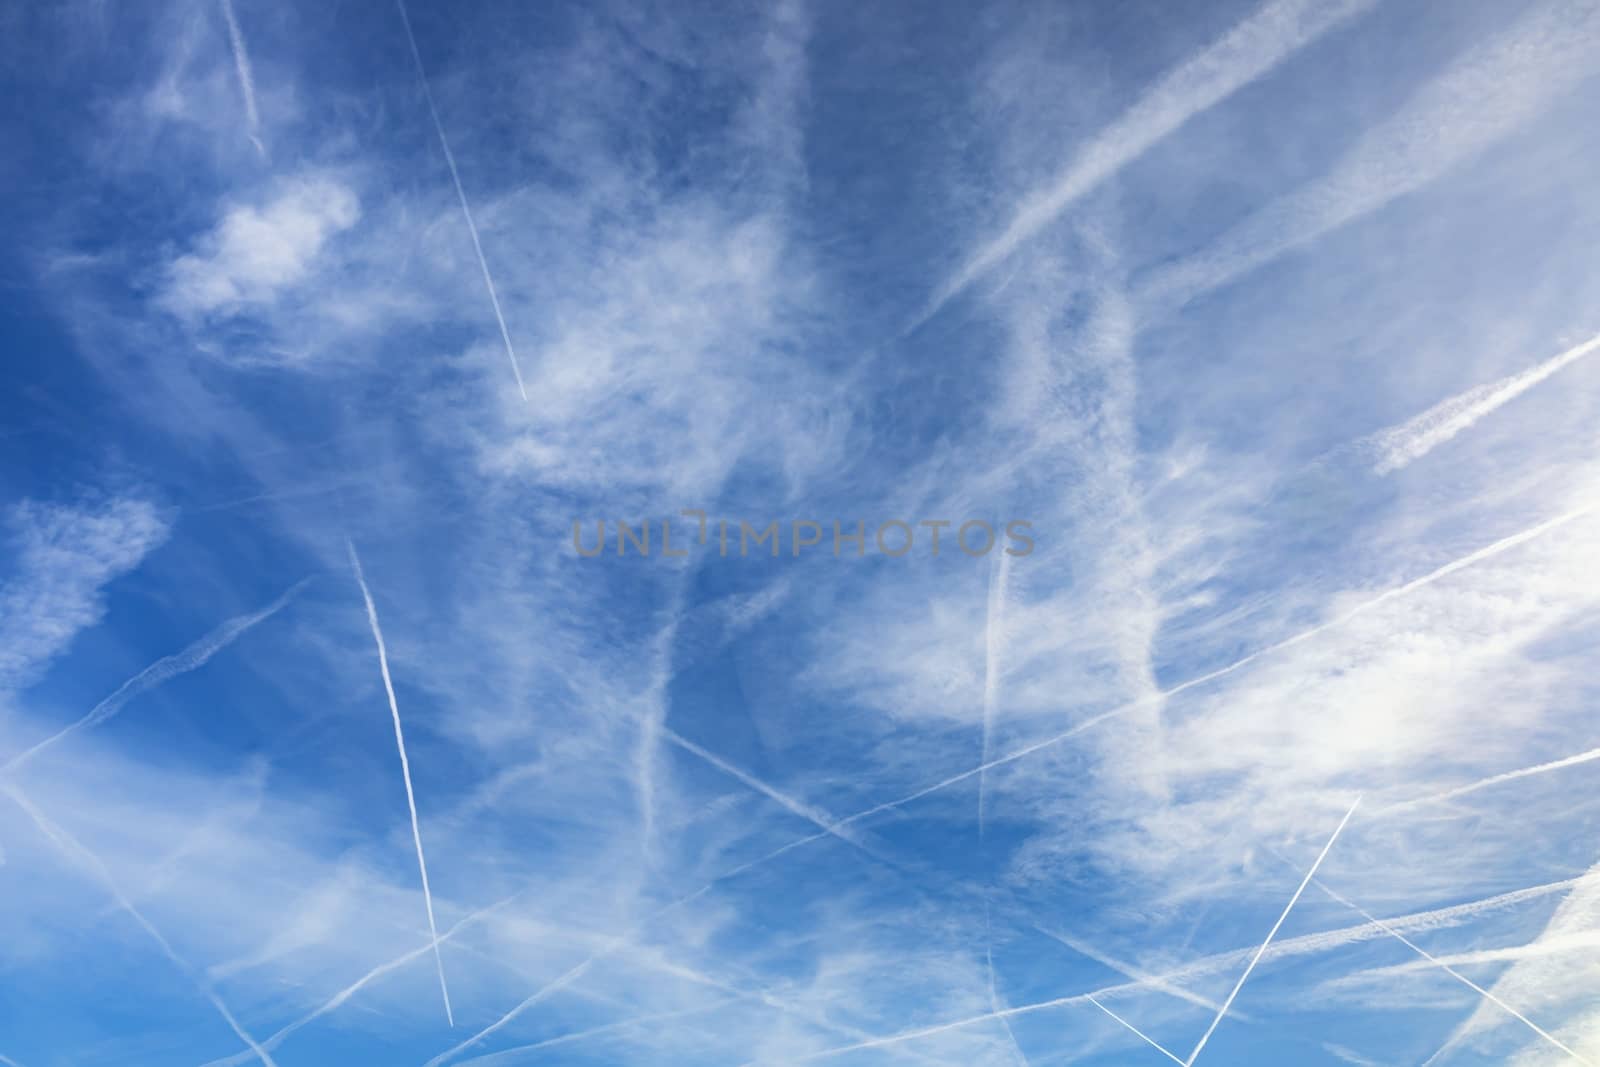 Chemtrails over the blue sky by svedoliver